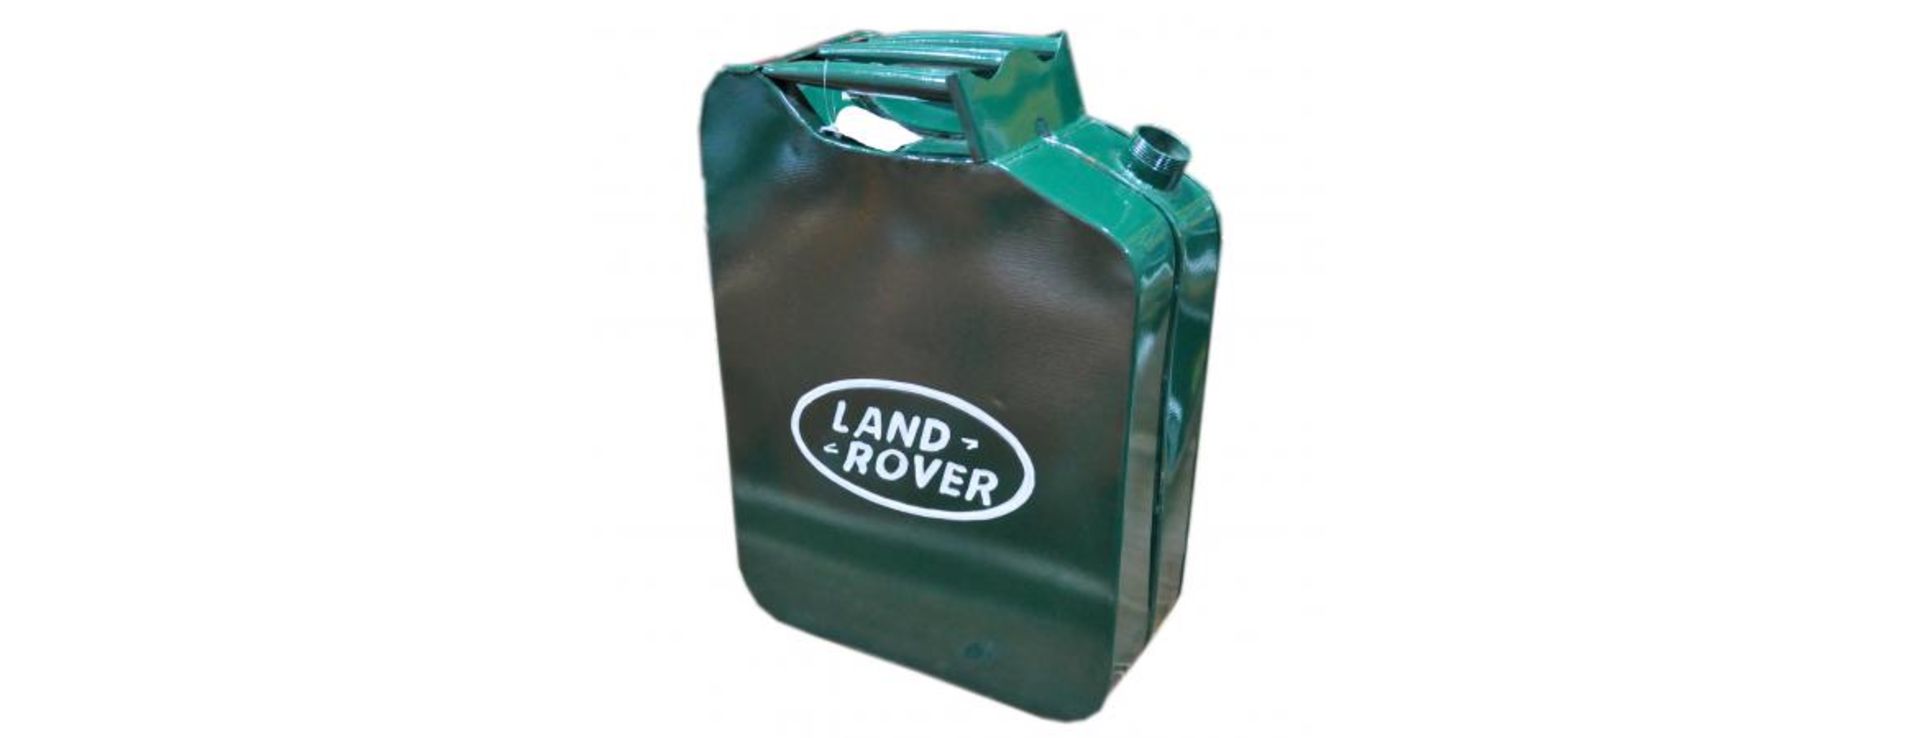 Land Rover Jerry Oil Can